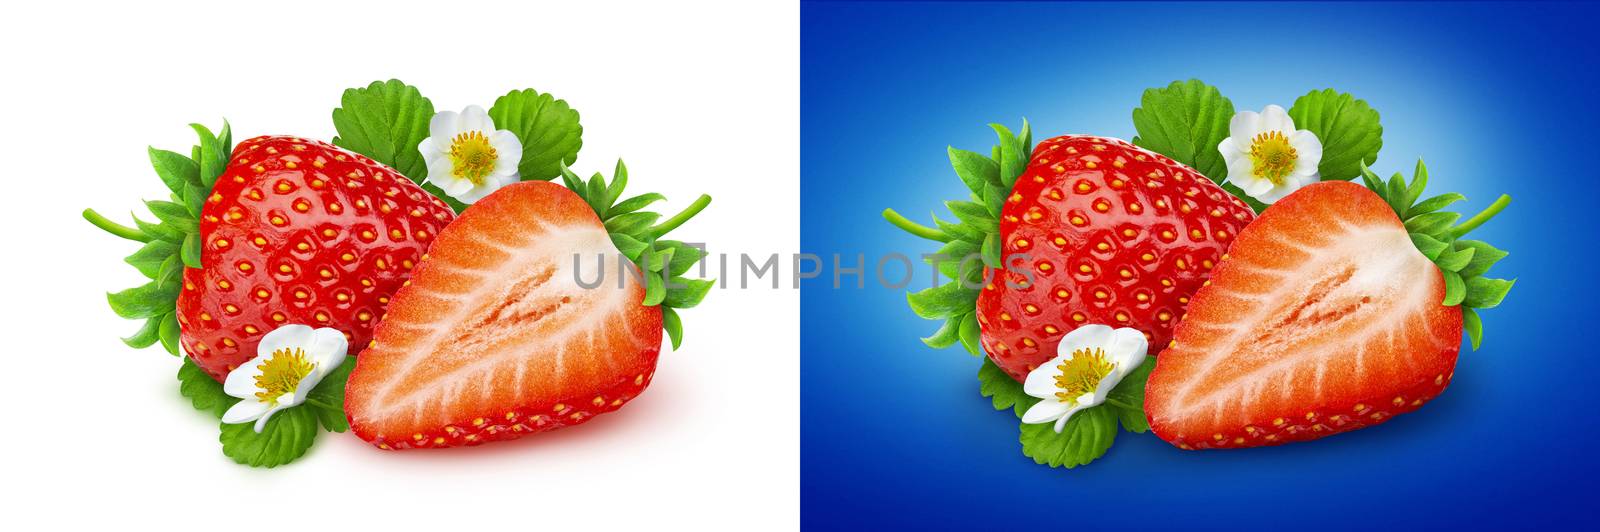 Strawberry isolated. Two strawberries with flowers and leaves isolated on white and blue backgrounds